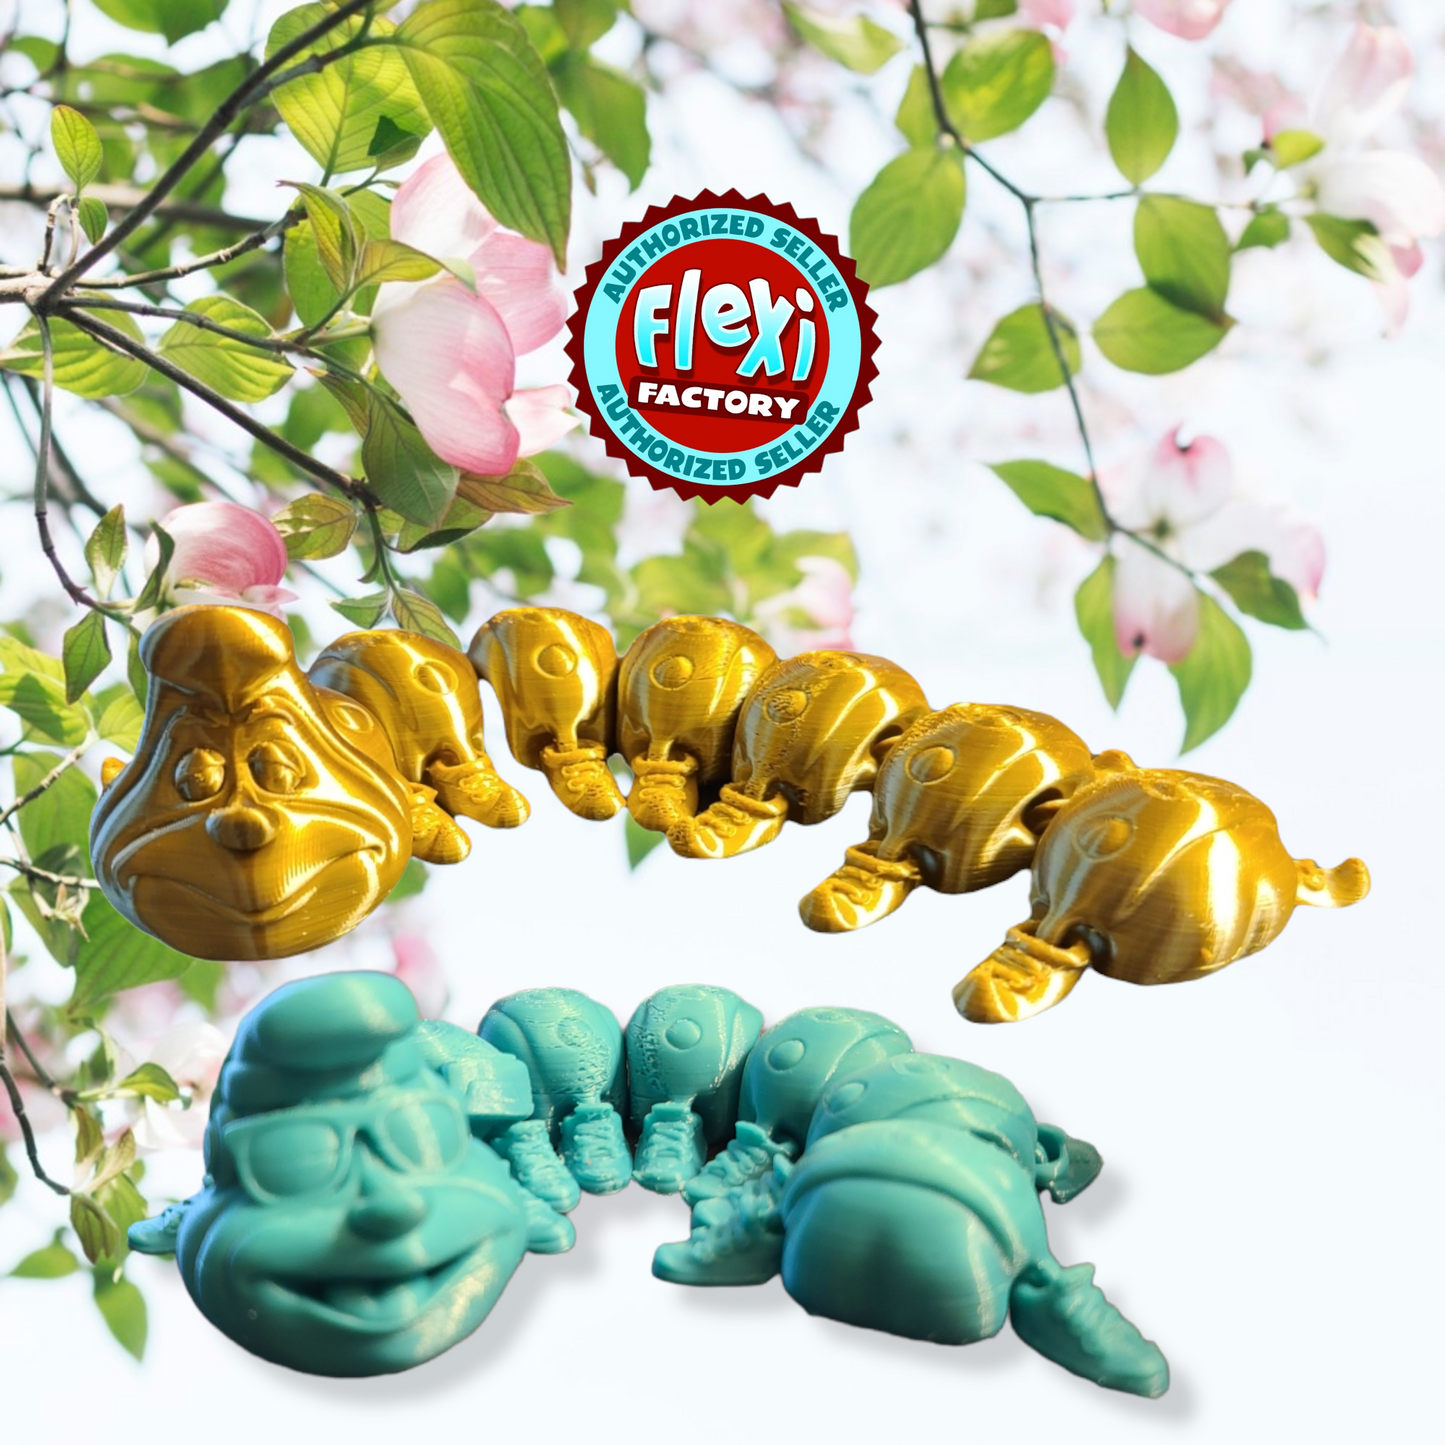 Caterpillar toy for a child, fidget toy filler for a kid Easter basket, birthday gift for a daughter, glow in the dark gift for a teenager